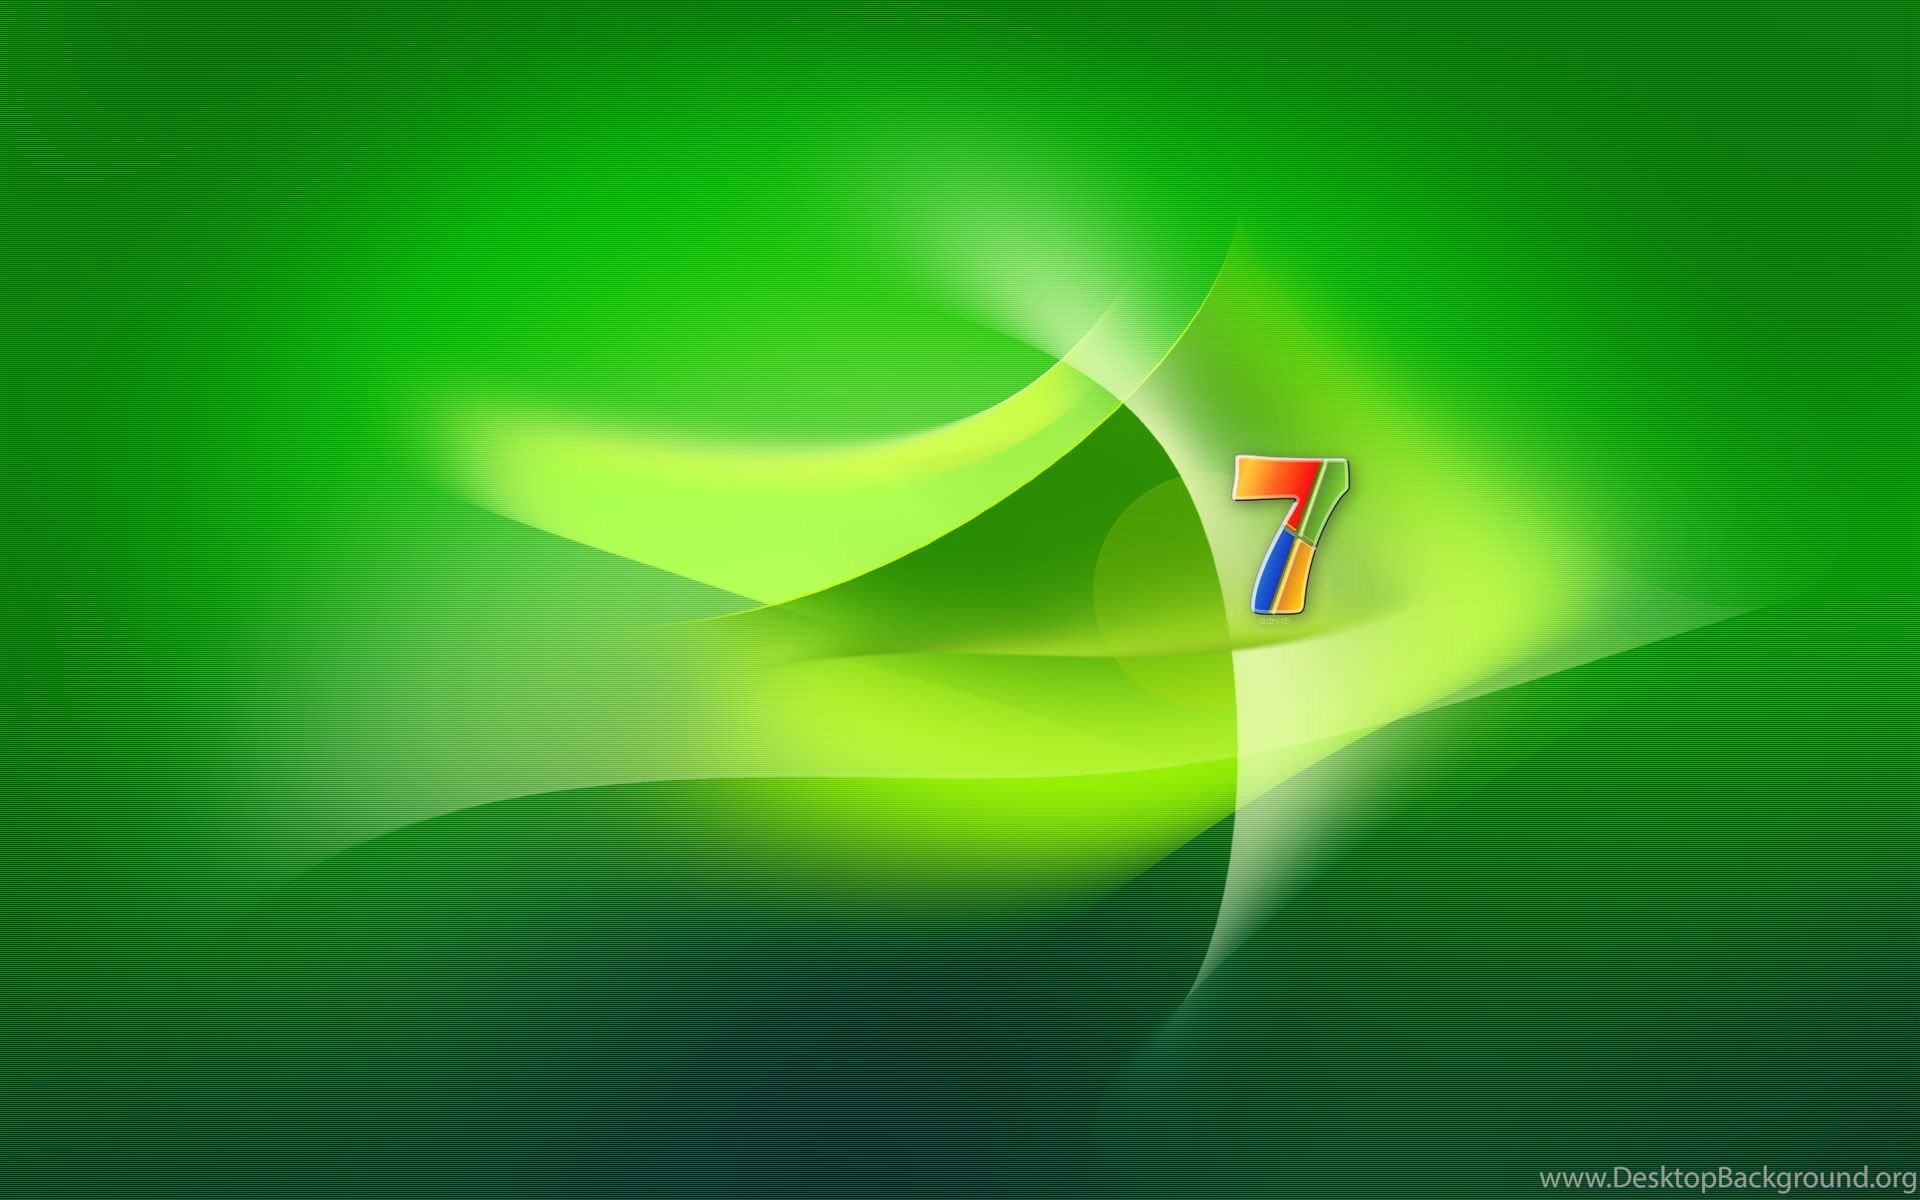 Windows 7 Green Wallpaper And Image Wallpaper, Picture, Photo Desktop Background